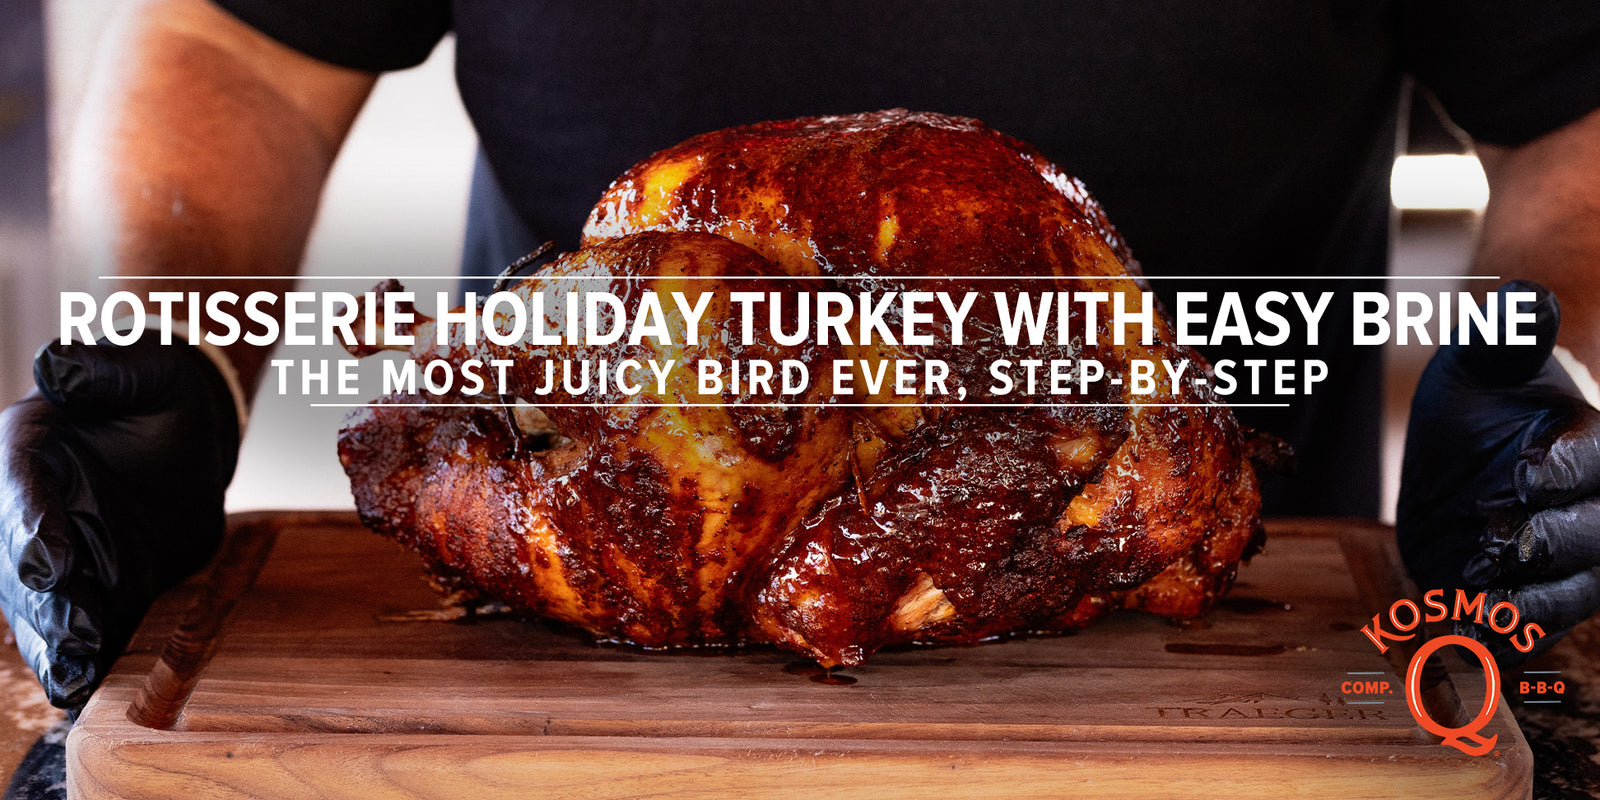 How Long to Cook a Turkey at 275? Super Simple Guide